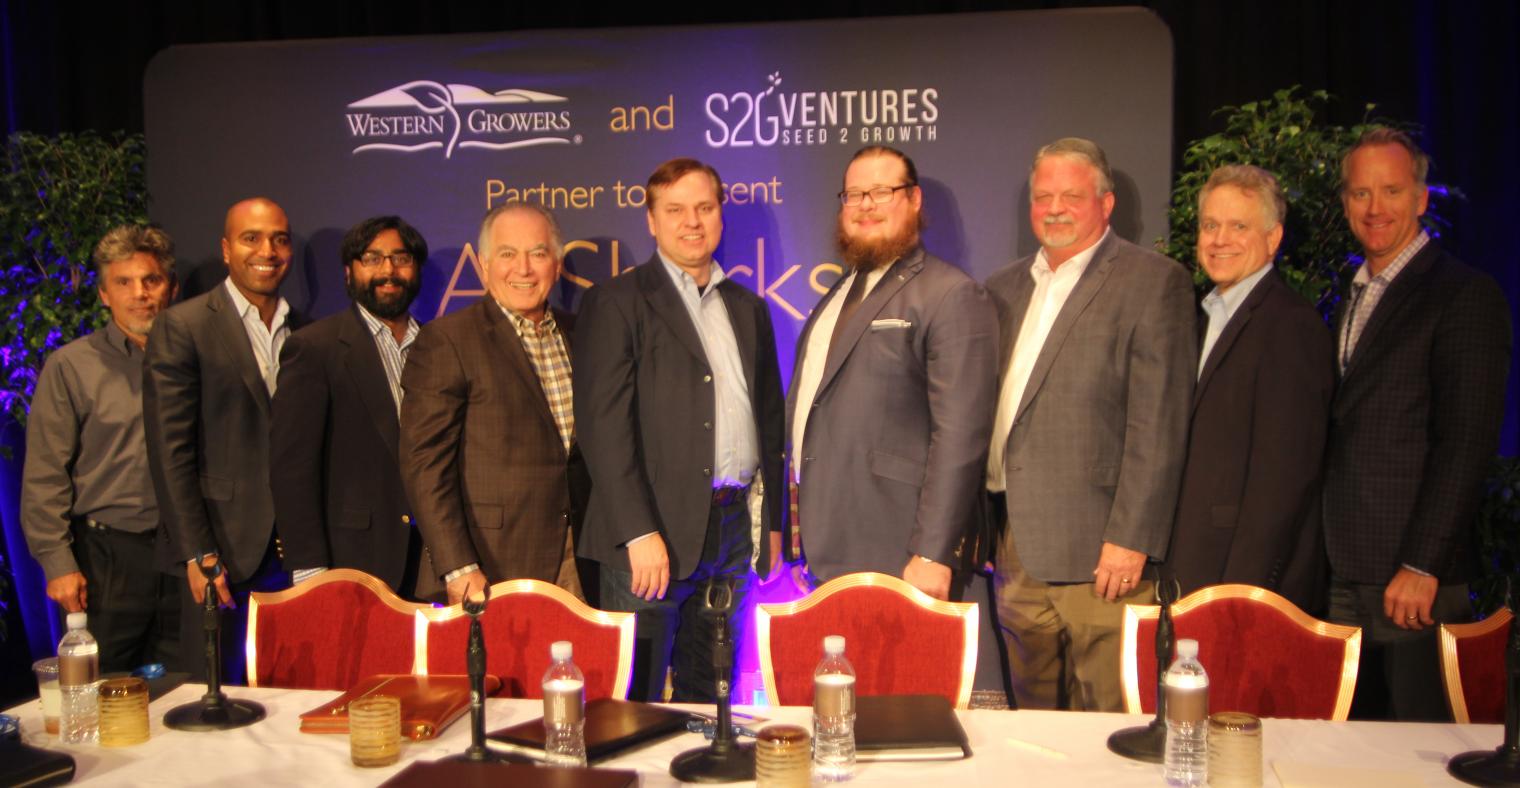 (left to right) Chuck Templeton, Managing Director at S2G Ventures; Matthew Walker, Principal at S2G Ventures; Sanjeev Krishnan, Managing Director and CIO at S2G Ventures; Tom Nassif, President &amp; CEO at Western Growers; Bruce Rasa, CEO at AgVoice; Aidan M